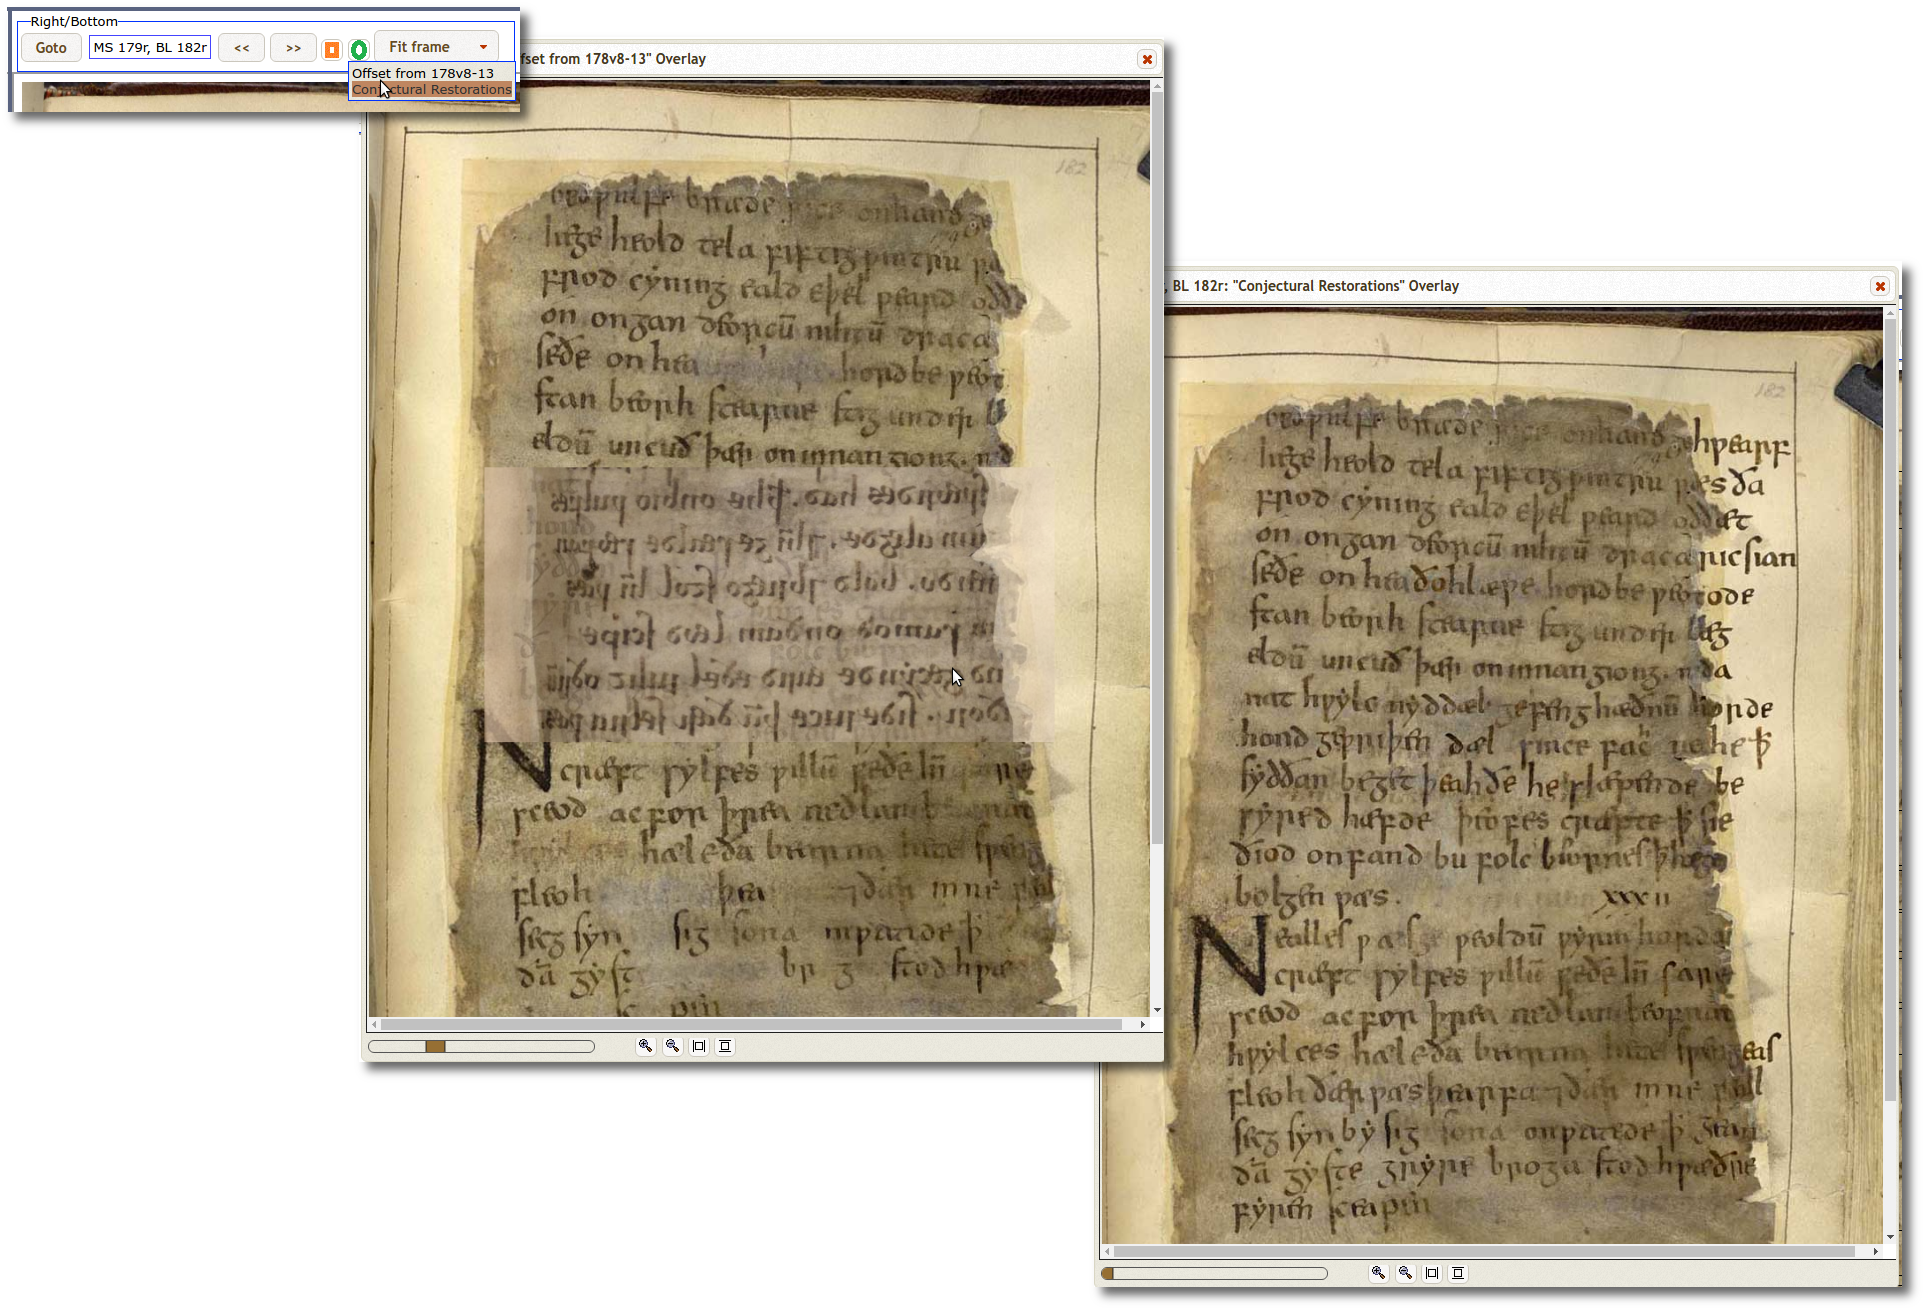 Screenshots showing the Overlay button (left), the "offset" view of f. 179r (reversed superimposition) with opacity set to about 20% (centre), and the "conjectural restoration" view with opacity set to 0 (right).